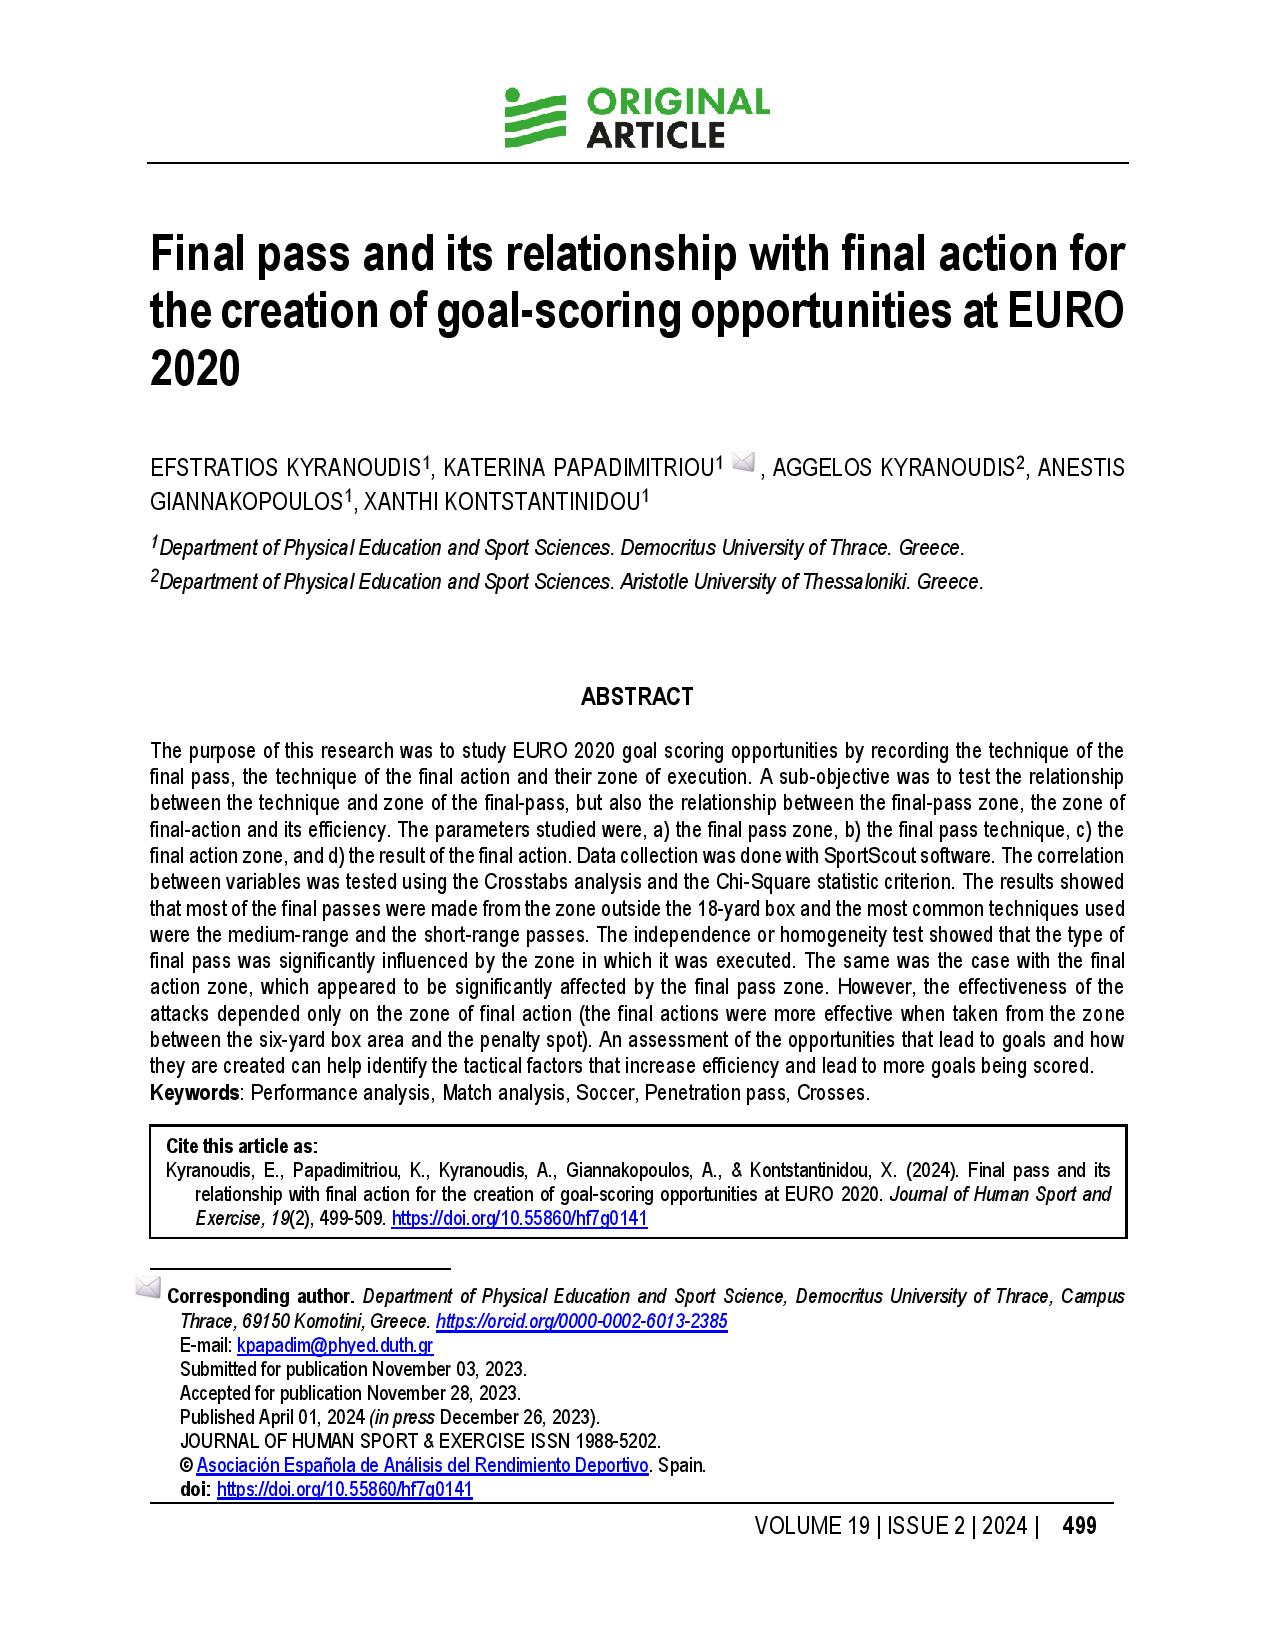 Final pass and its relationship with final action for the creation of goal-scoring opportunities at EURO 2020